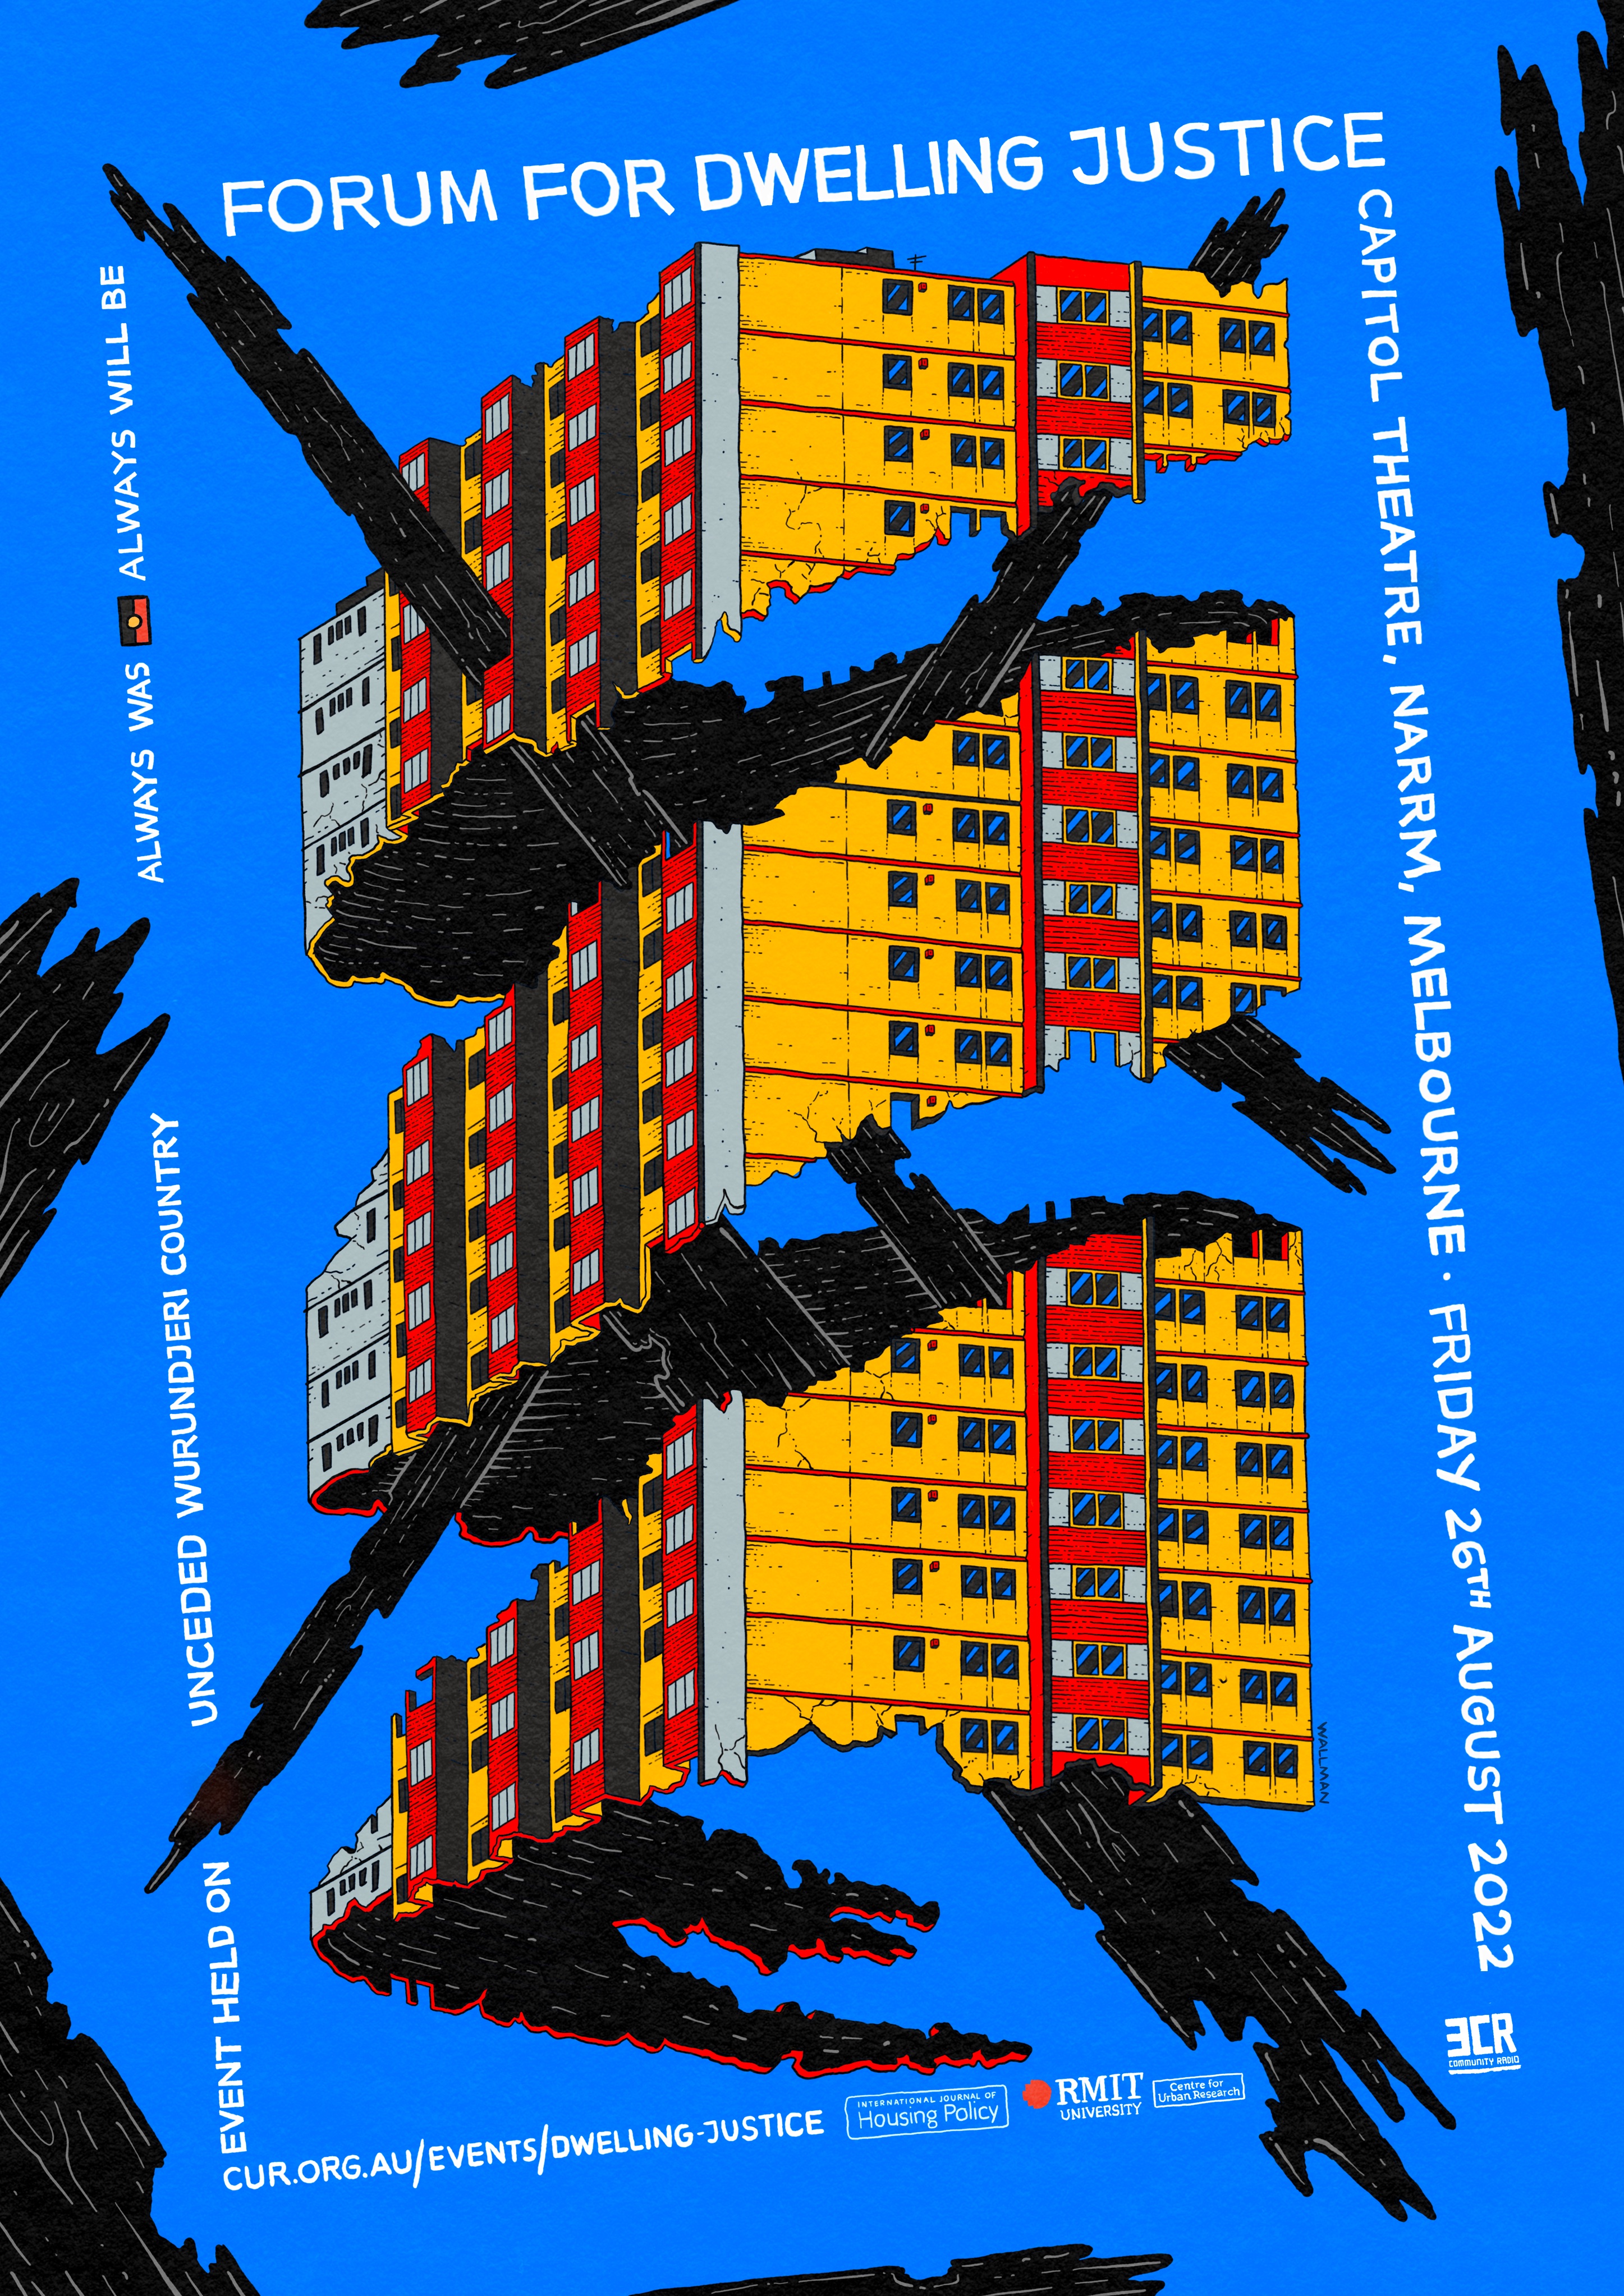 Forum for Dwelling Justice Poster. Bright blue background with red and yellow building in forefront that has been separated